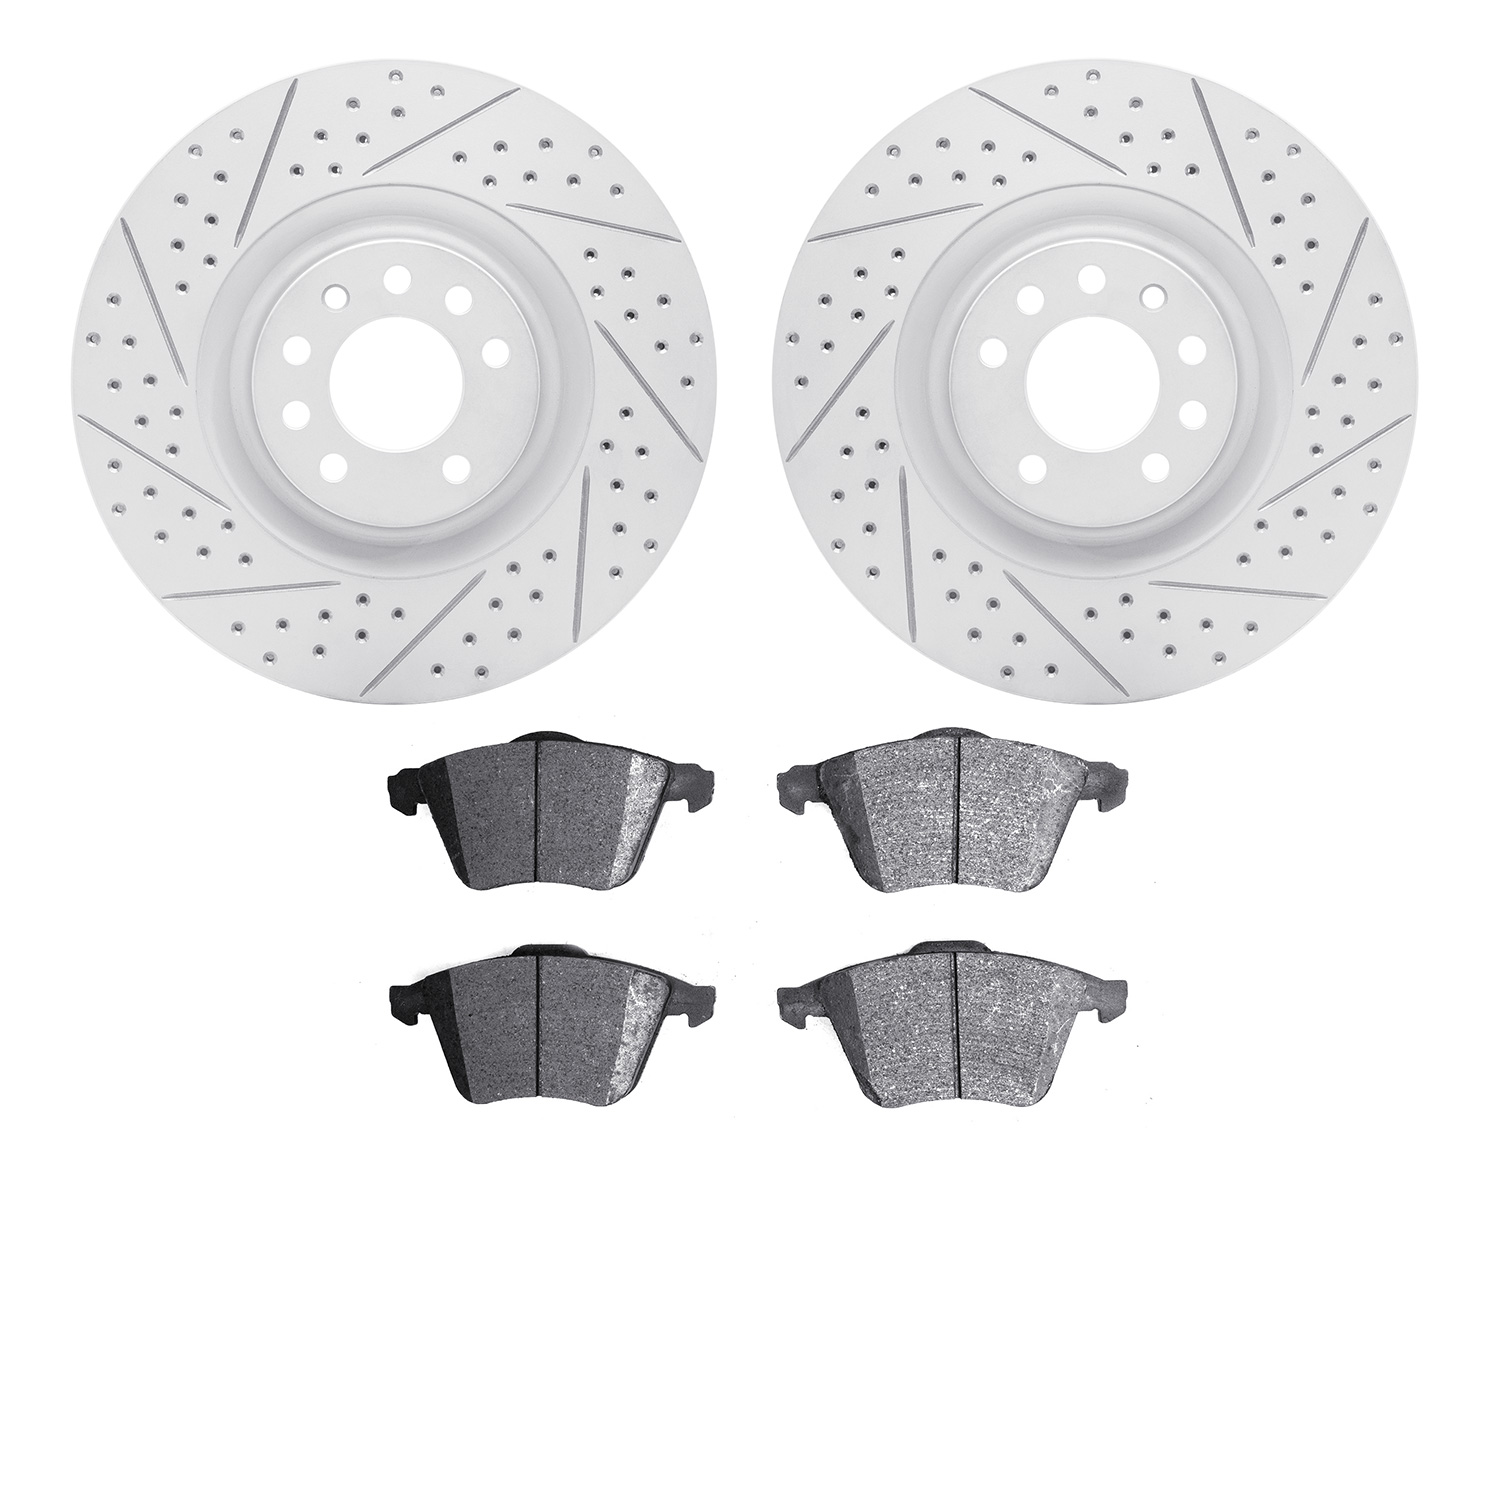 2502-65019 Geoperformance Drilled/Slotted Rotors w/5000 Advanced Brake Pads Kit, 2008-2011 GM, Position: Front